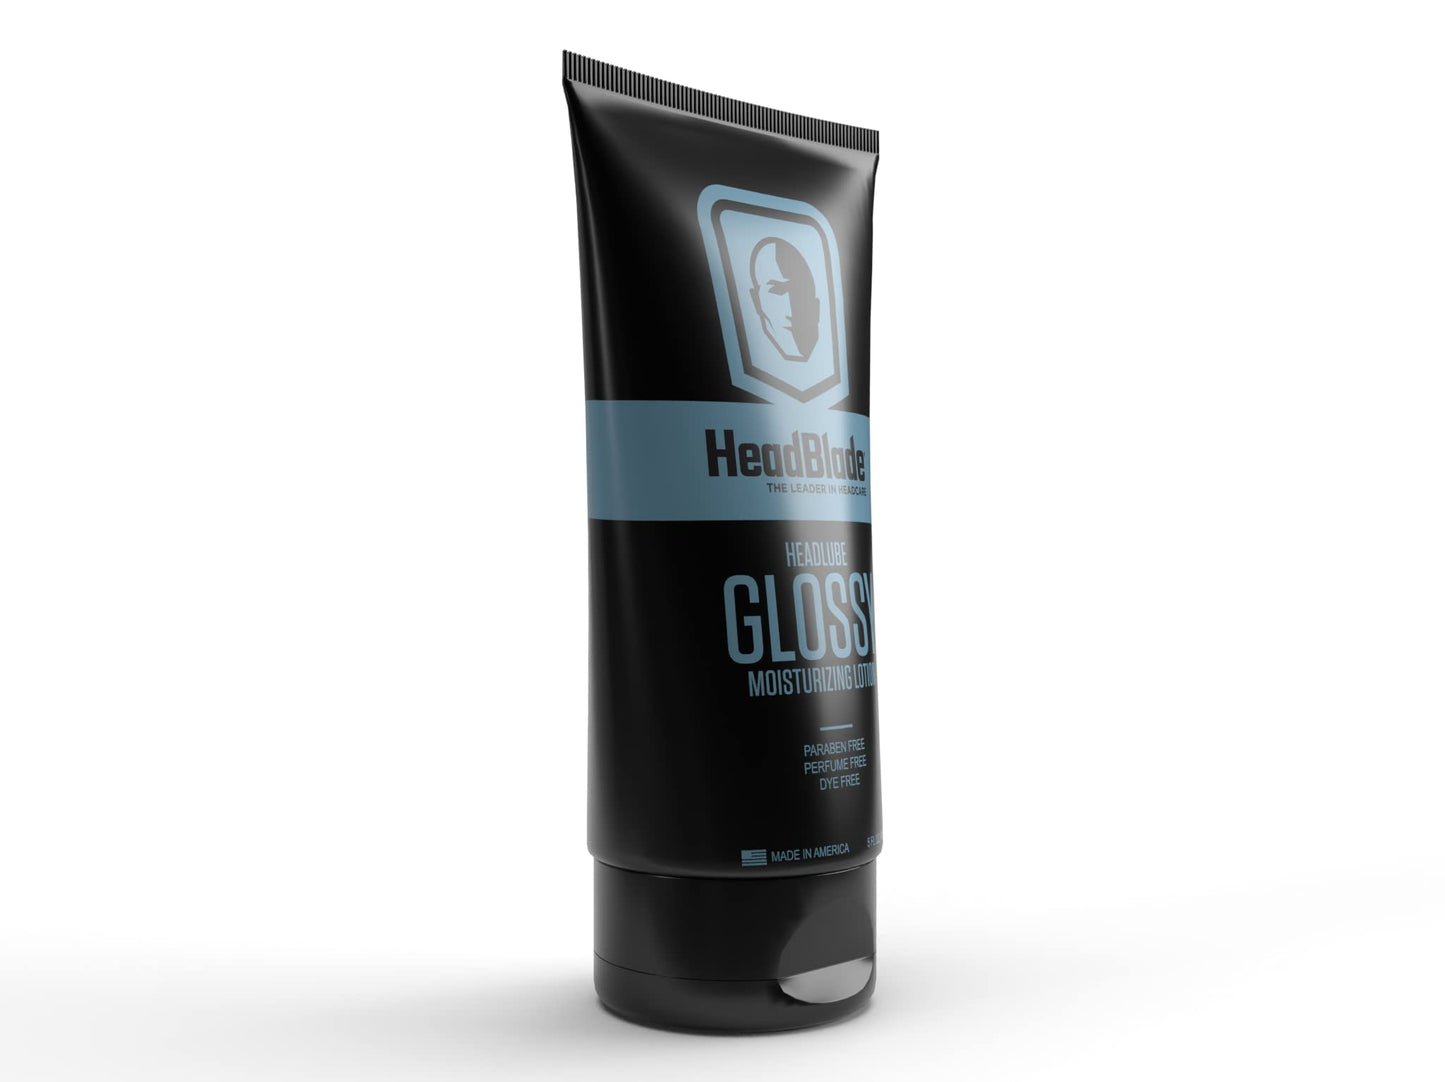 HeadBlade HeadLube Glossy Aftershave Moisturizer Lotion for Men (5 oz) - Leaves Head Shiny and Grease-Free